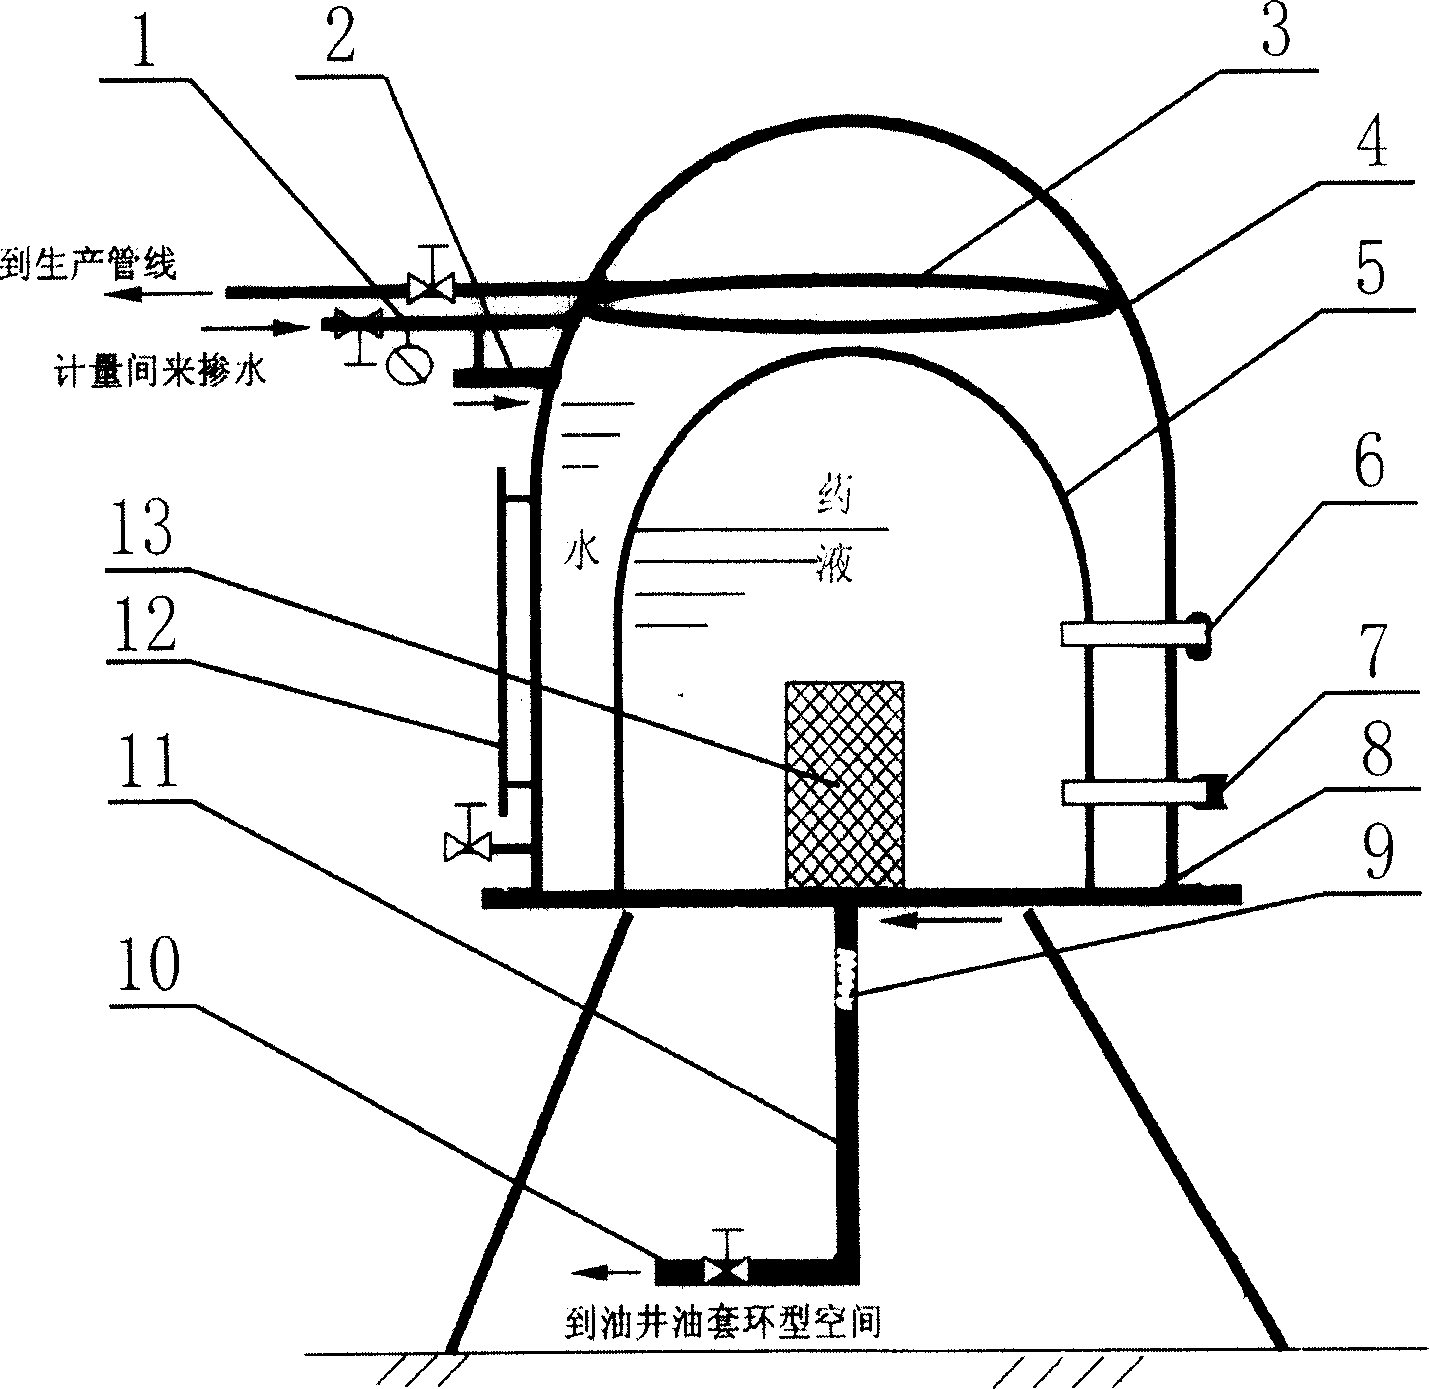 Wellhead drip medicament charging method by using water pressure to retain constant medicament charging differential pressure